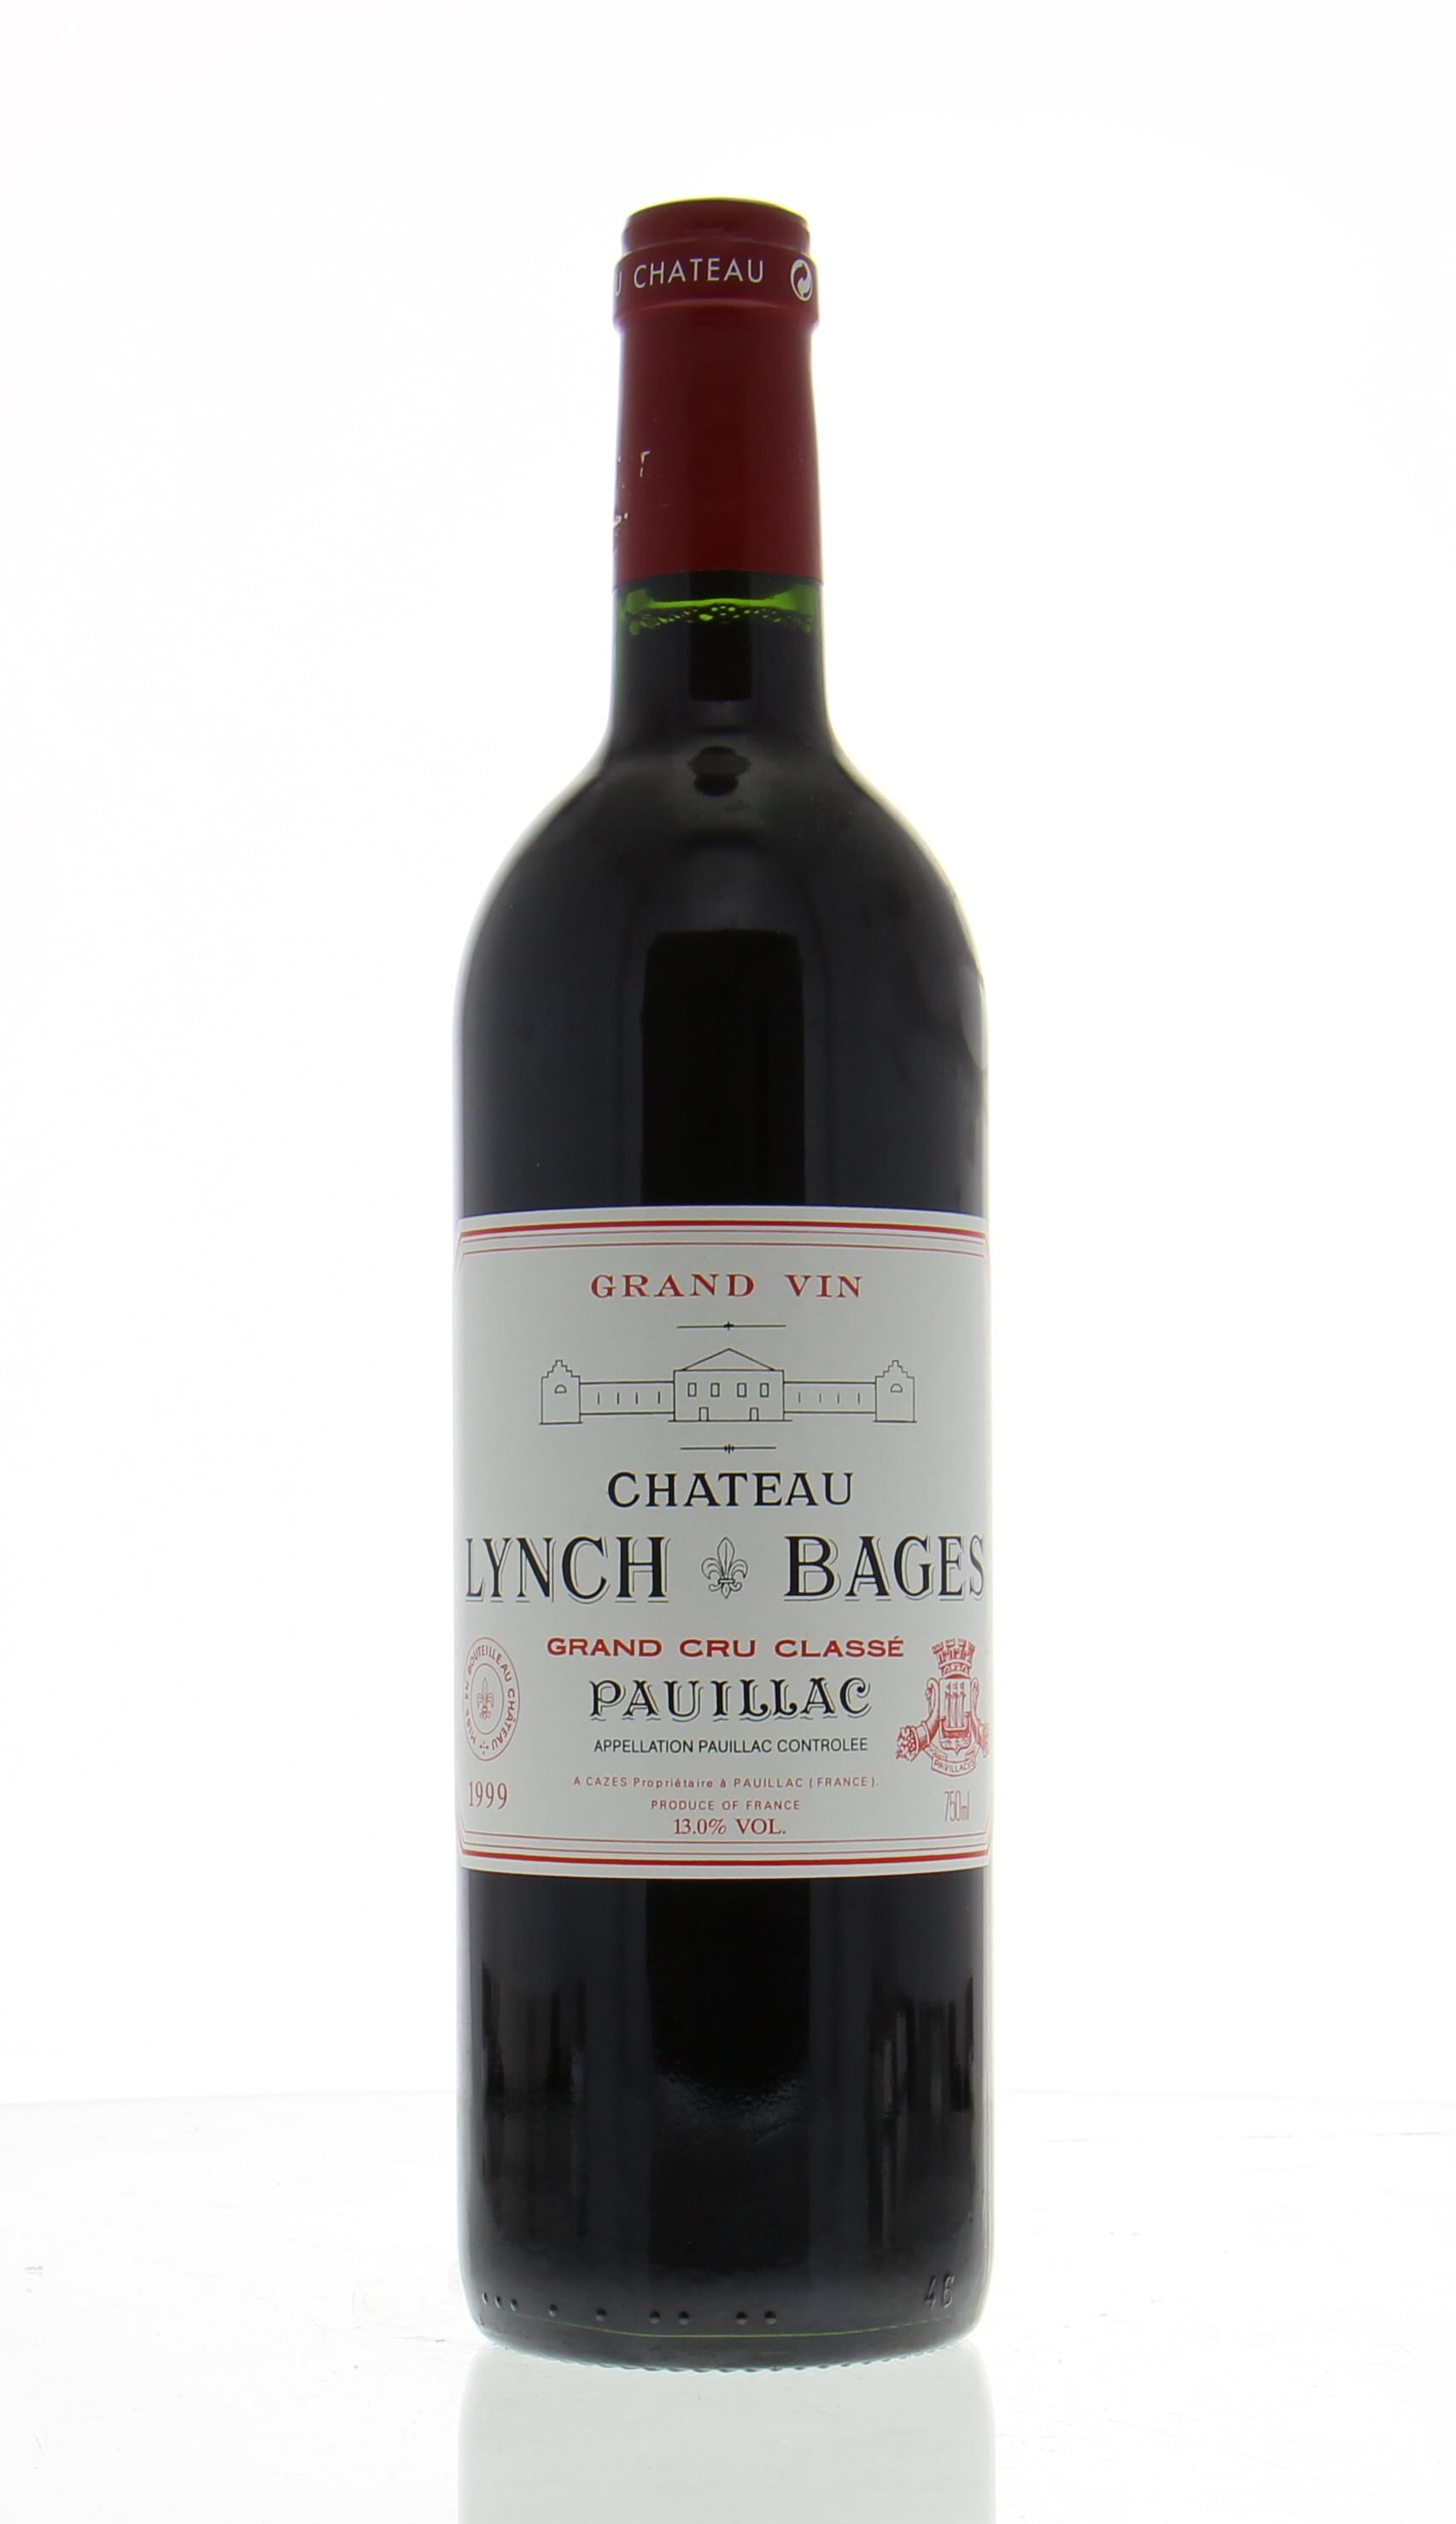 Chateau Lynch Bages - Chateau Lynch Bages 1999 From Original Wooden Case